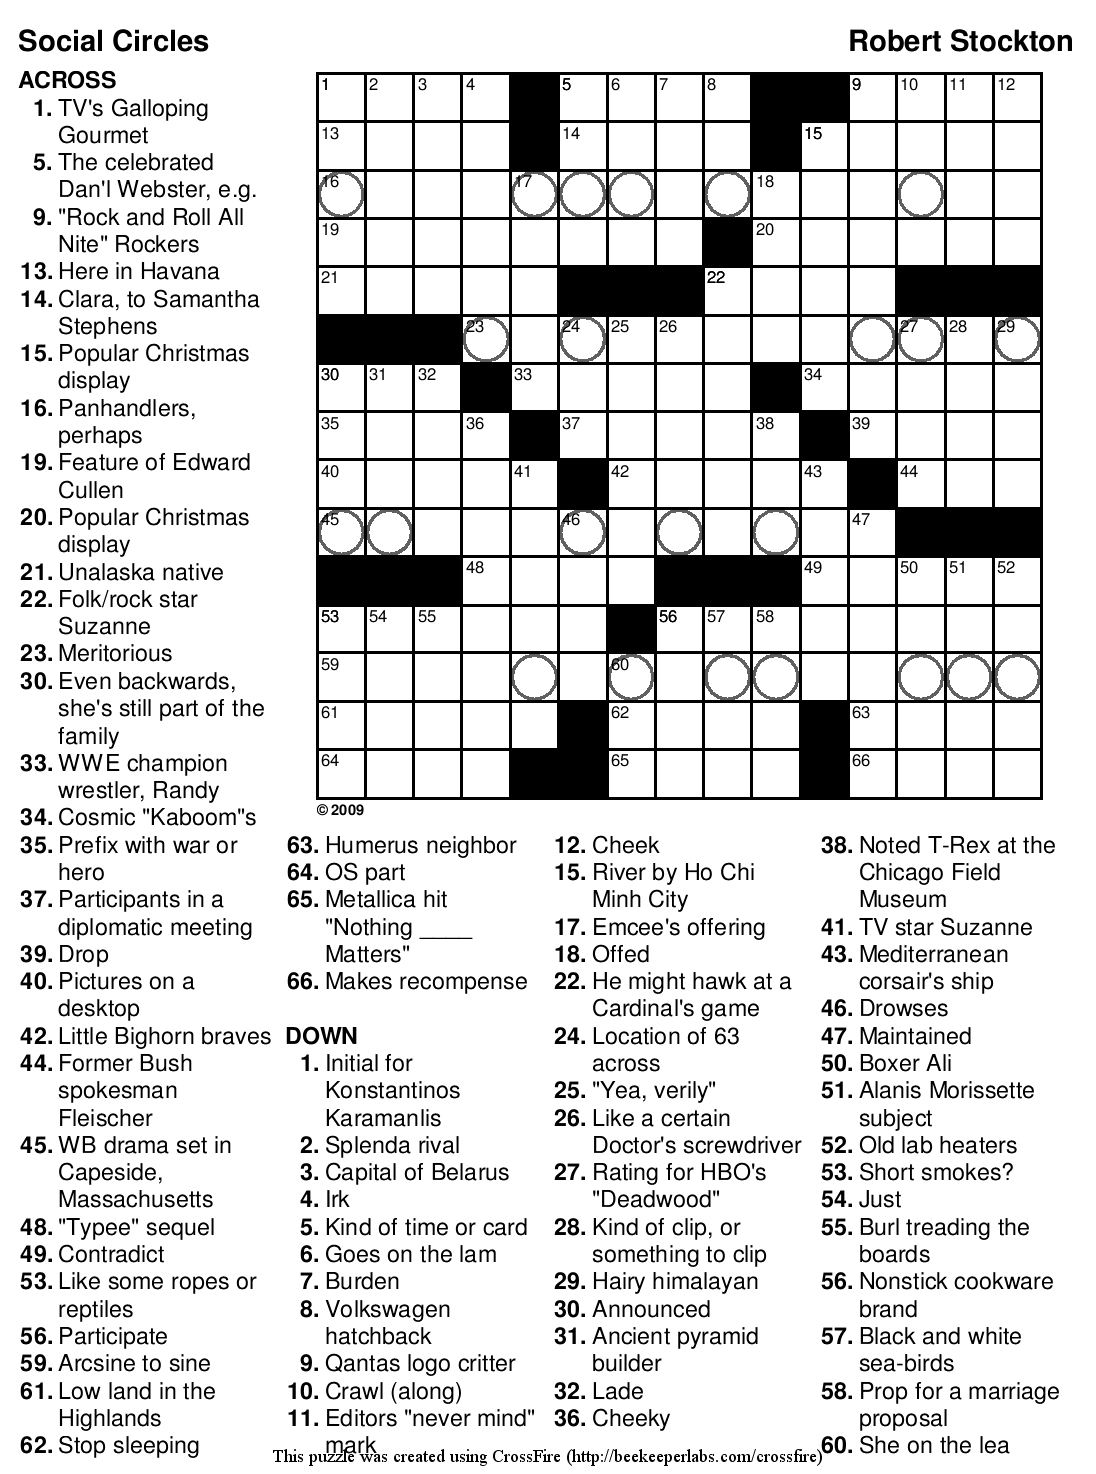 Crossword Puzzles Printable - Yahoo Image Search Results | Crossword - 15X15 Printable Crossword Puzzles